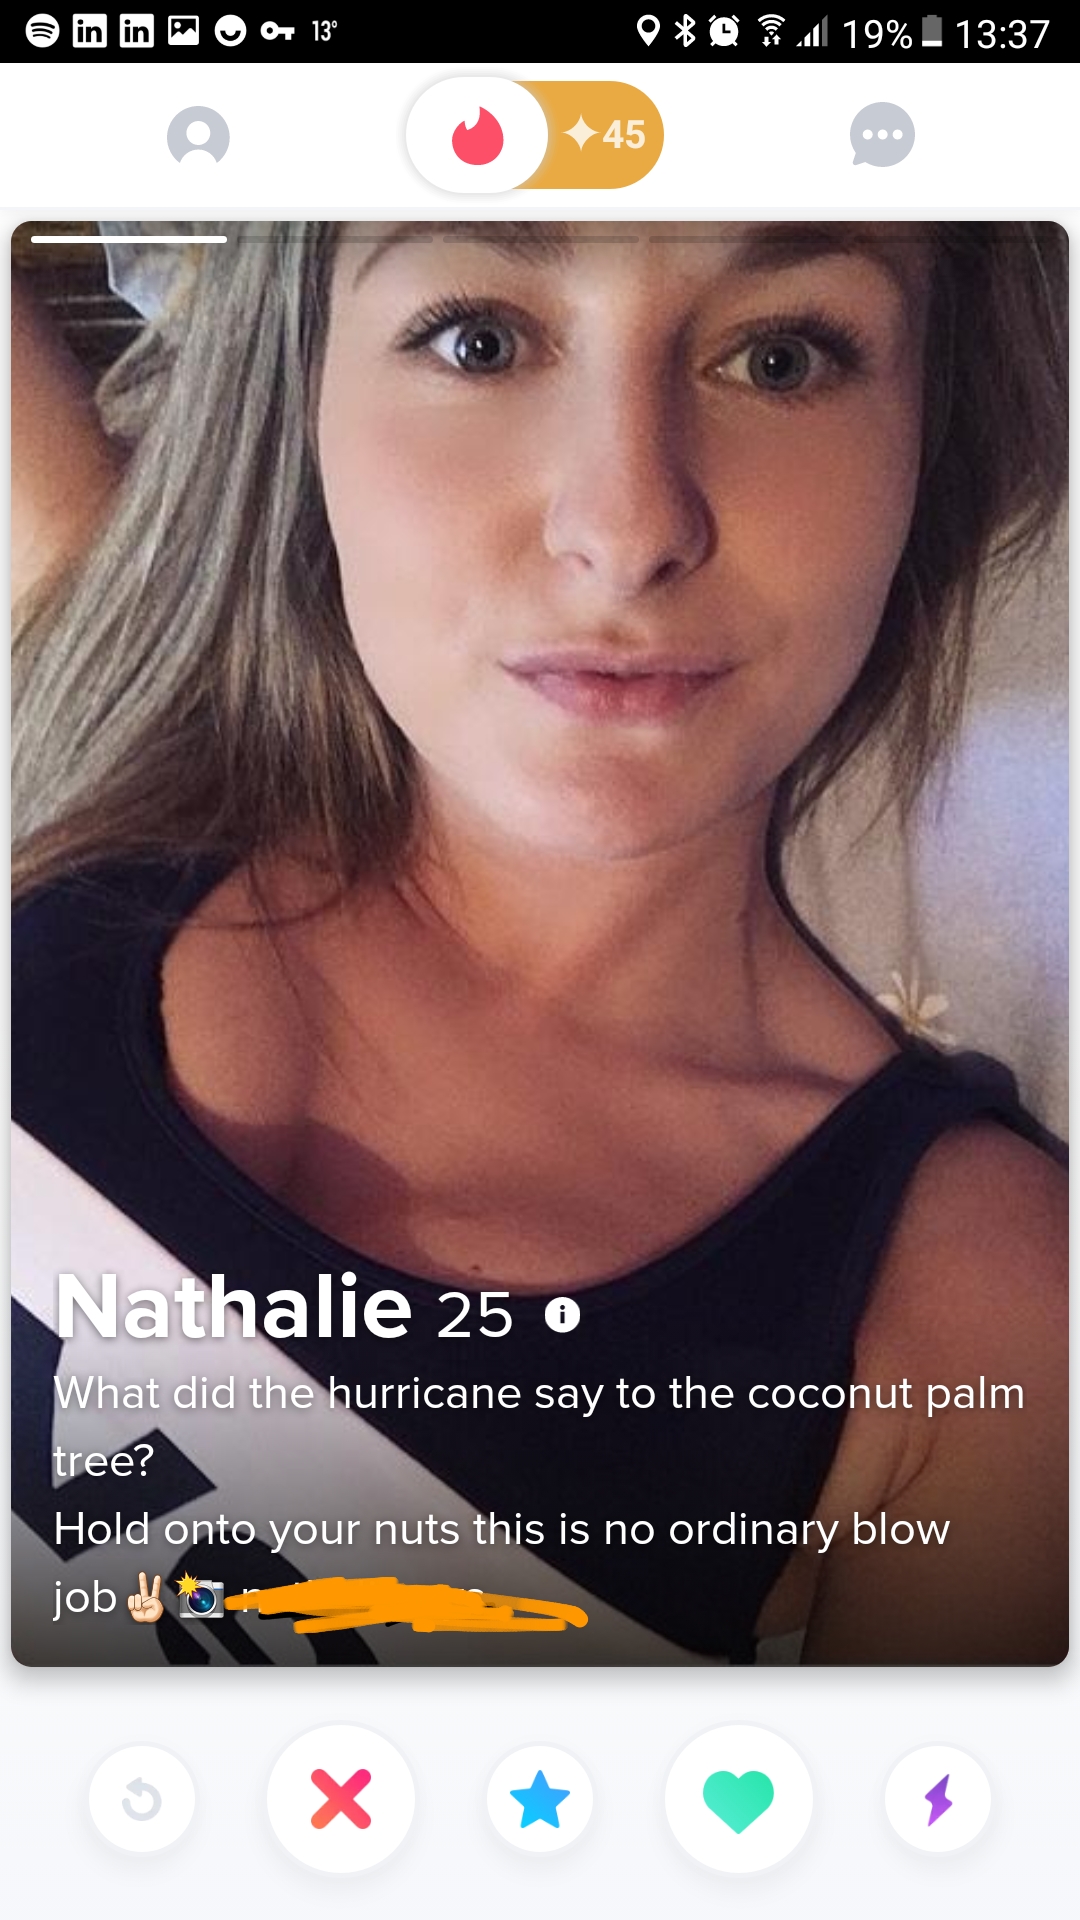 selfie - in in P O 3 0 19% 45 Nathalie 25 0 What did the hurricane say to the coconut palm tree? Hold onto your nuts this is no ordinary blow job 104